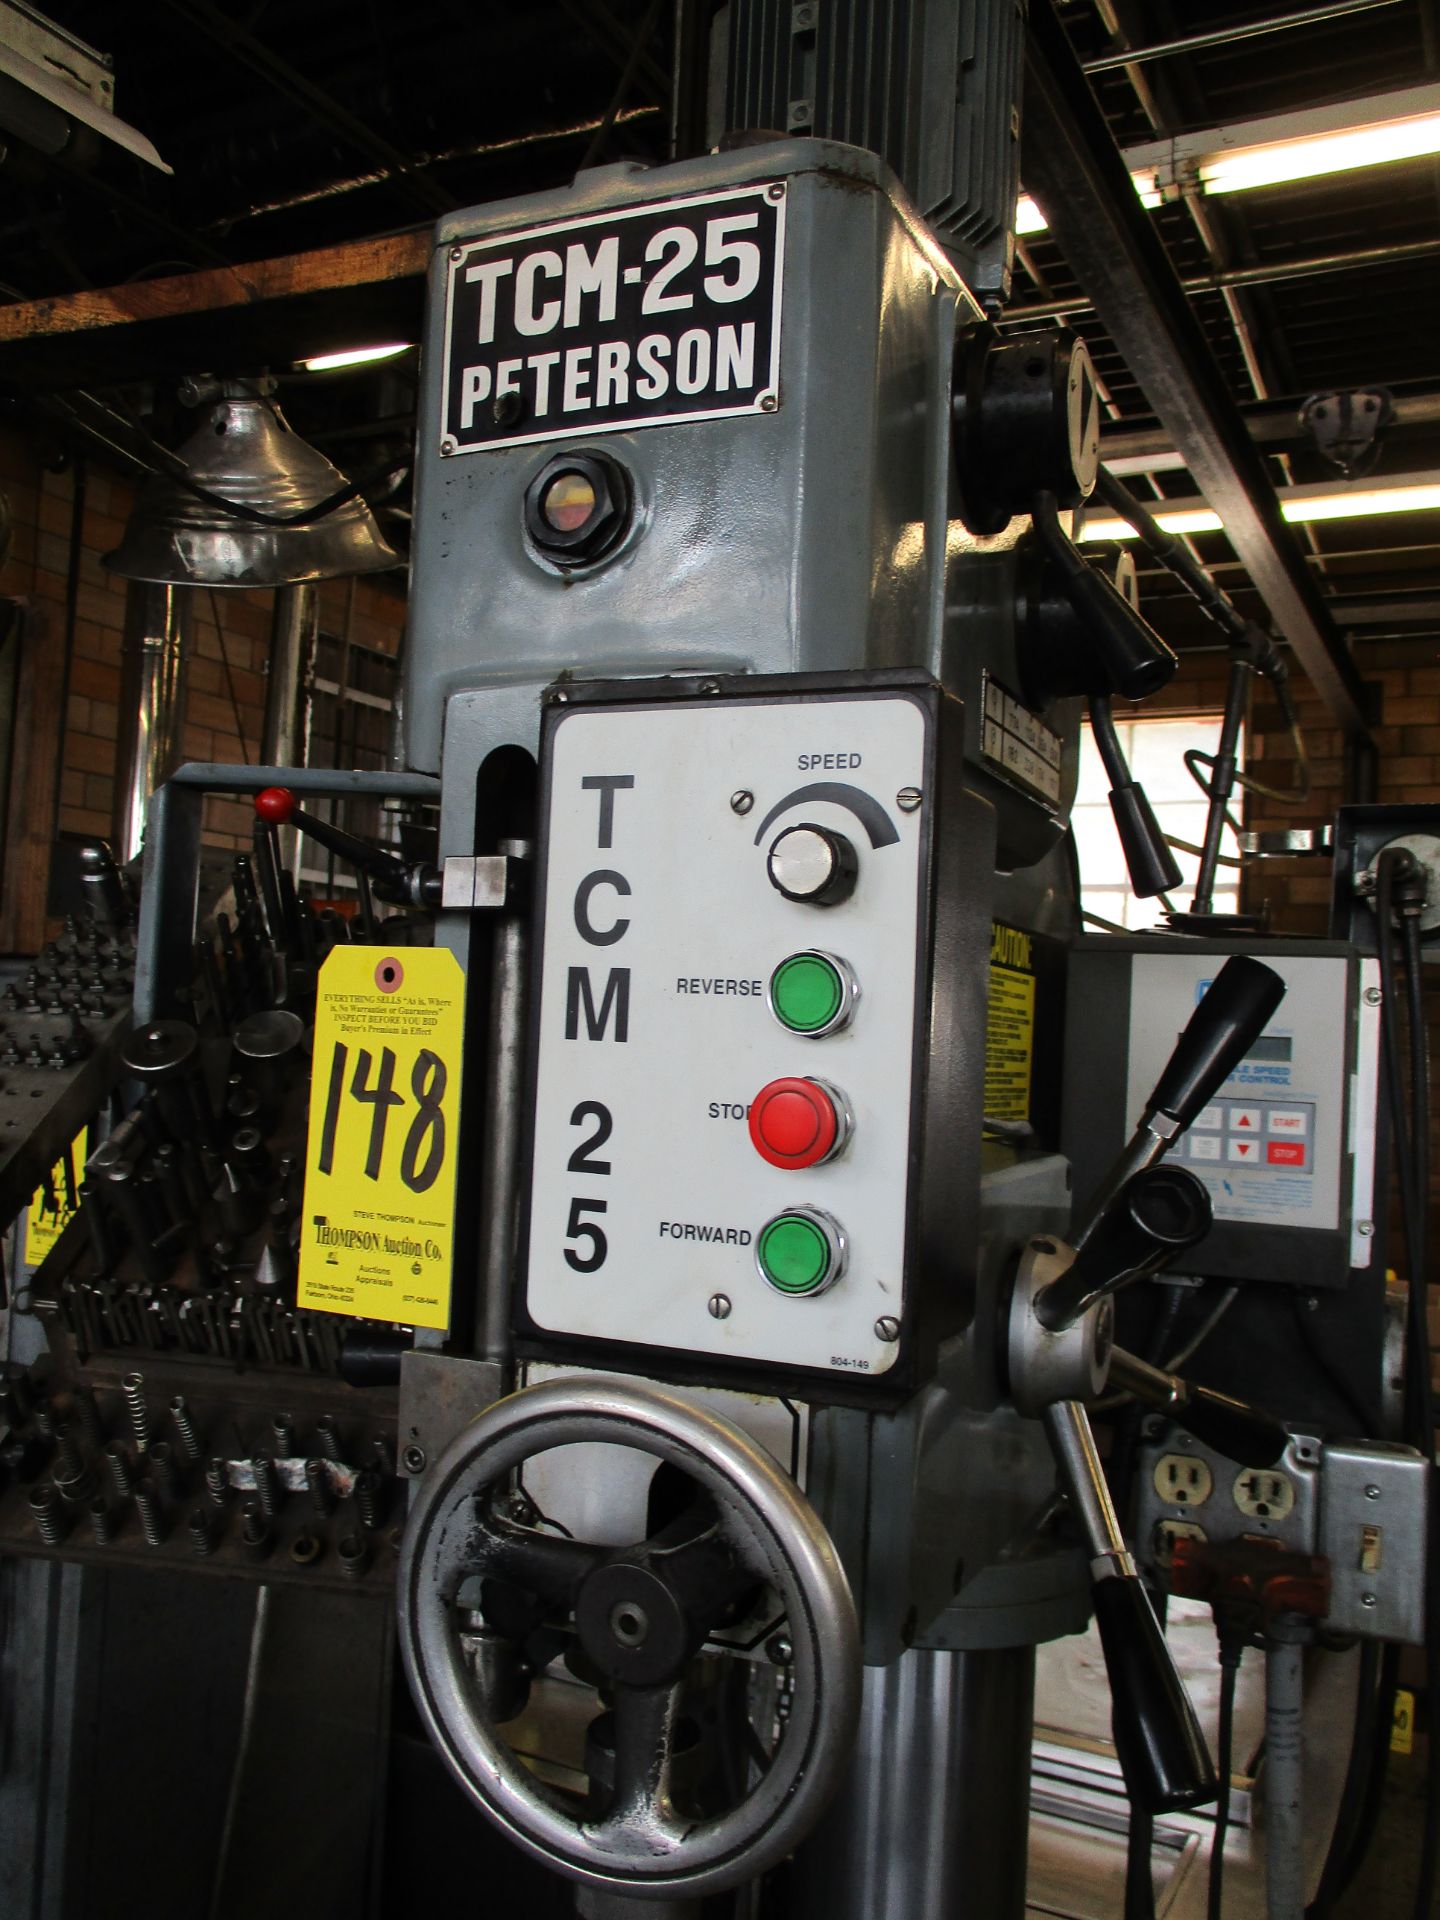 Peterson Model TCM-25 Valve Guide and Seat Machine, 44” Table Length, 26” Table Height, 6” Column - Image 3 of 11